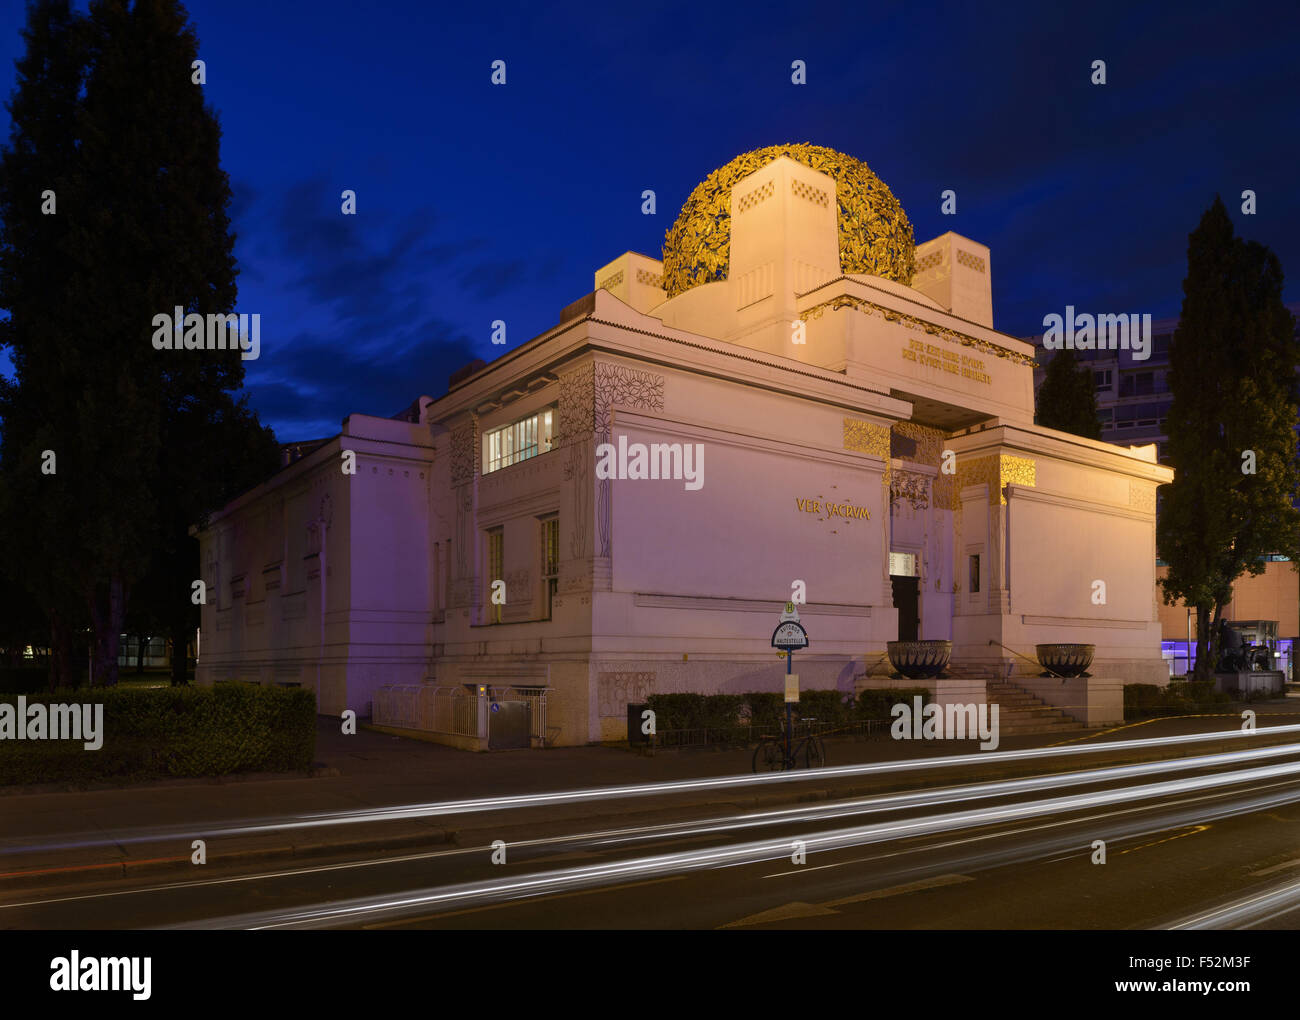 Austria, Vienna, exhibition building of the Vienna Secession, built in 1897/98 from Joseph Maria Olbrich in the style of Jugendstil, at night, Stock Photo